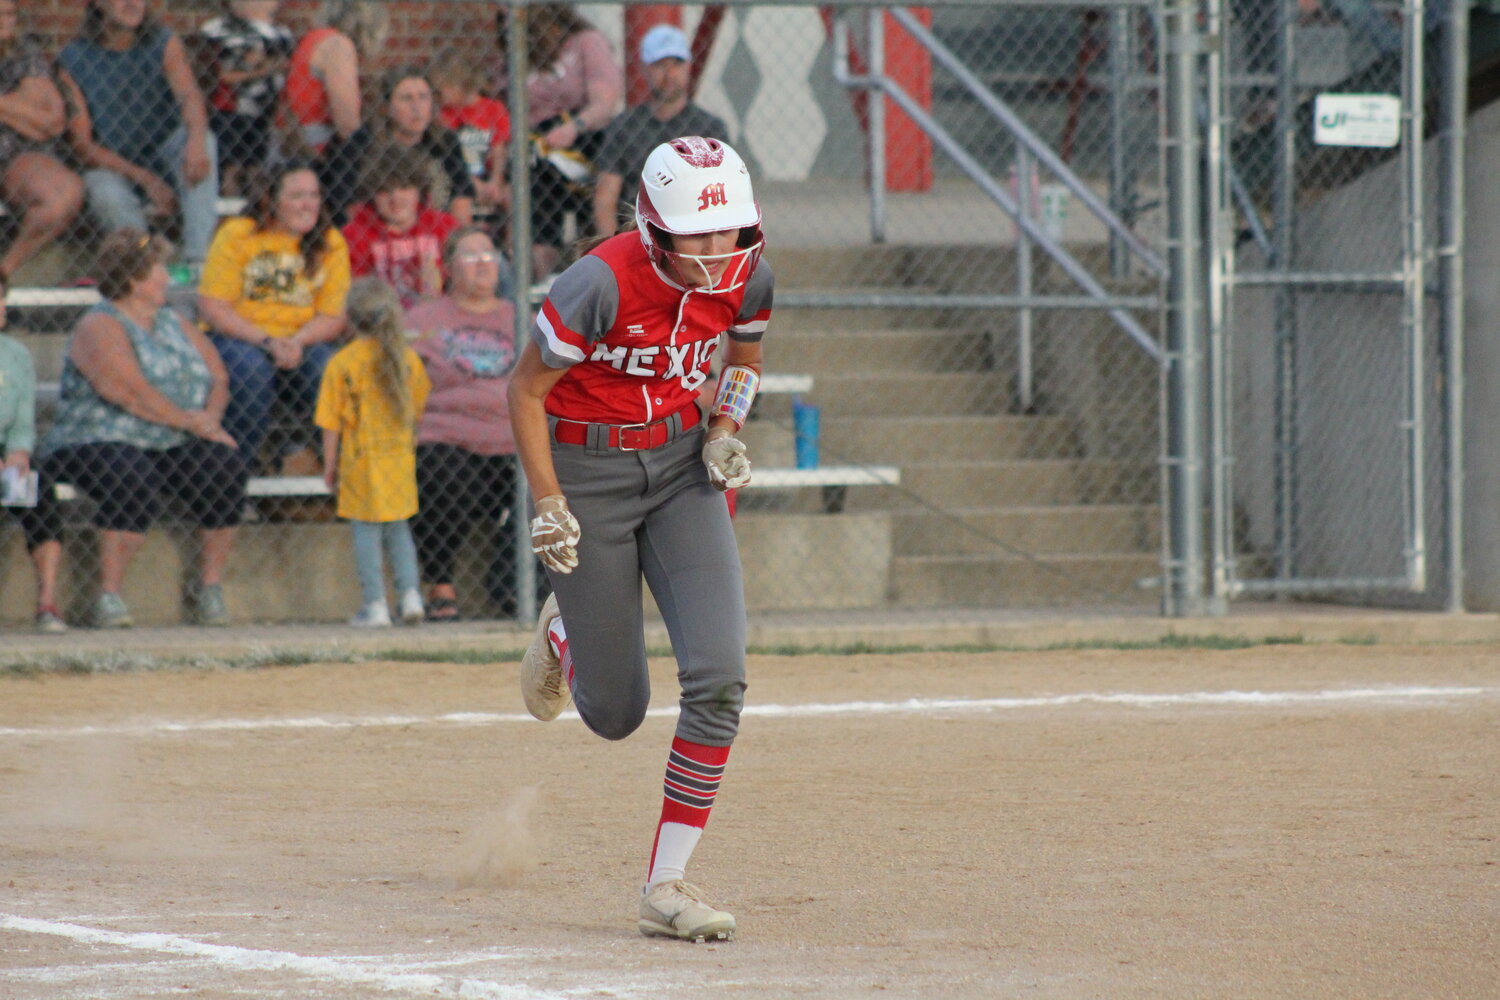 Mexico senior Brooke Teel runs out of the batter's box against Fulton on Thursday at home.